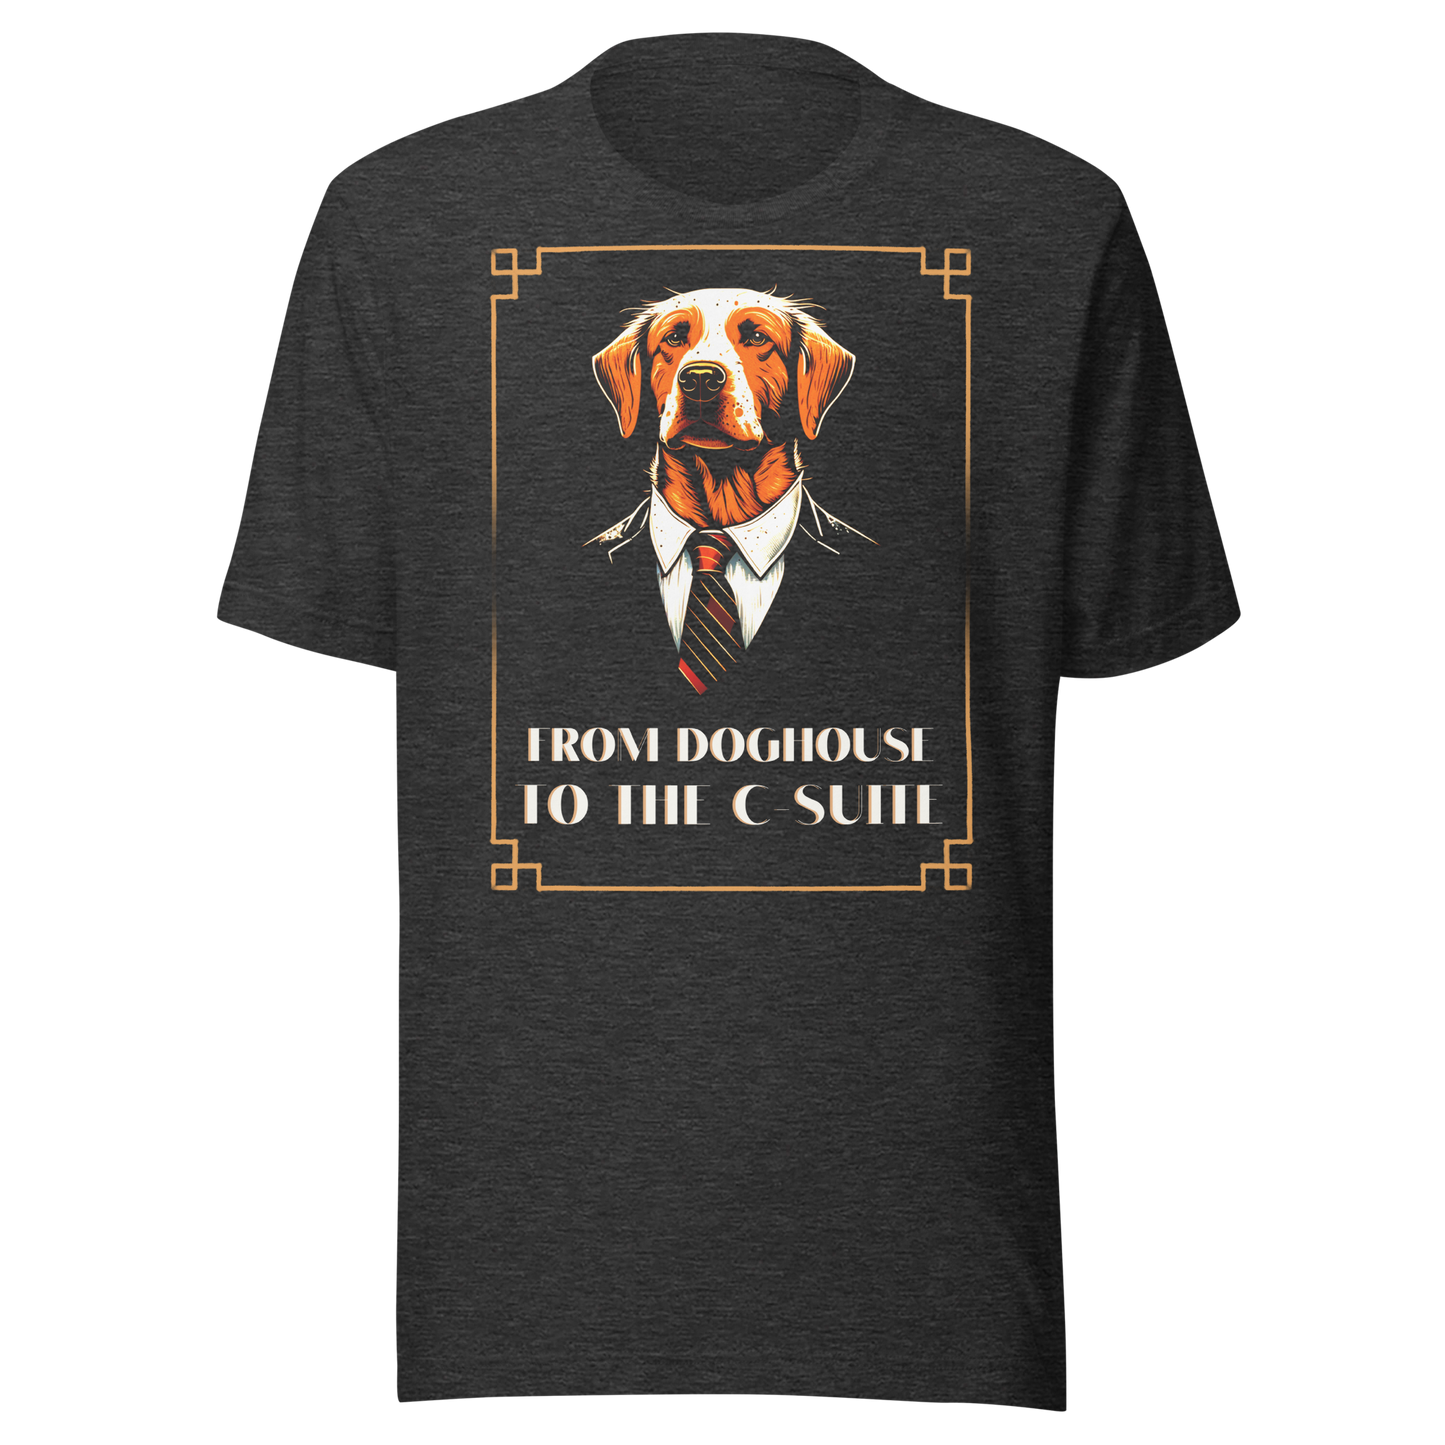 Go from the Doghouse to the C-Suite with our Unisex T-Shirts!